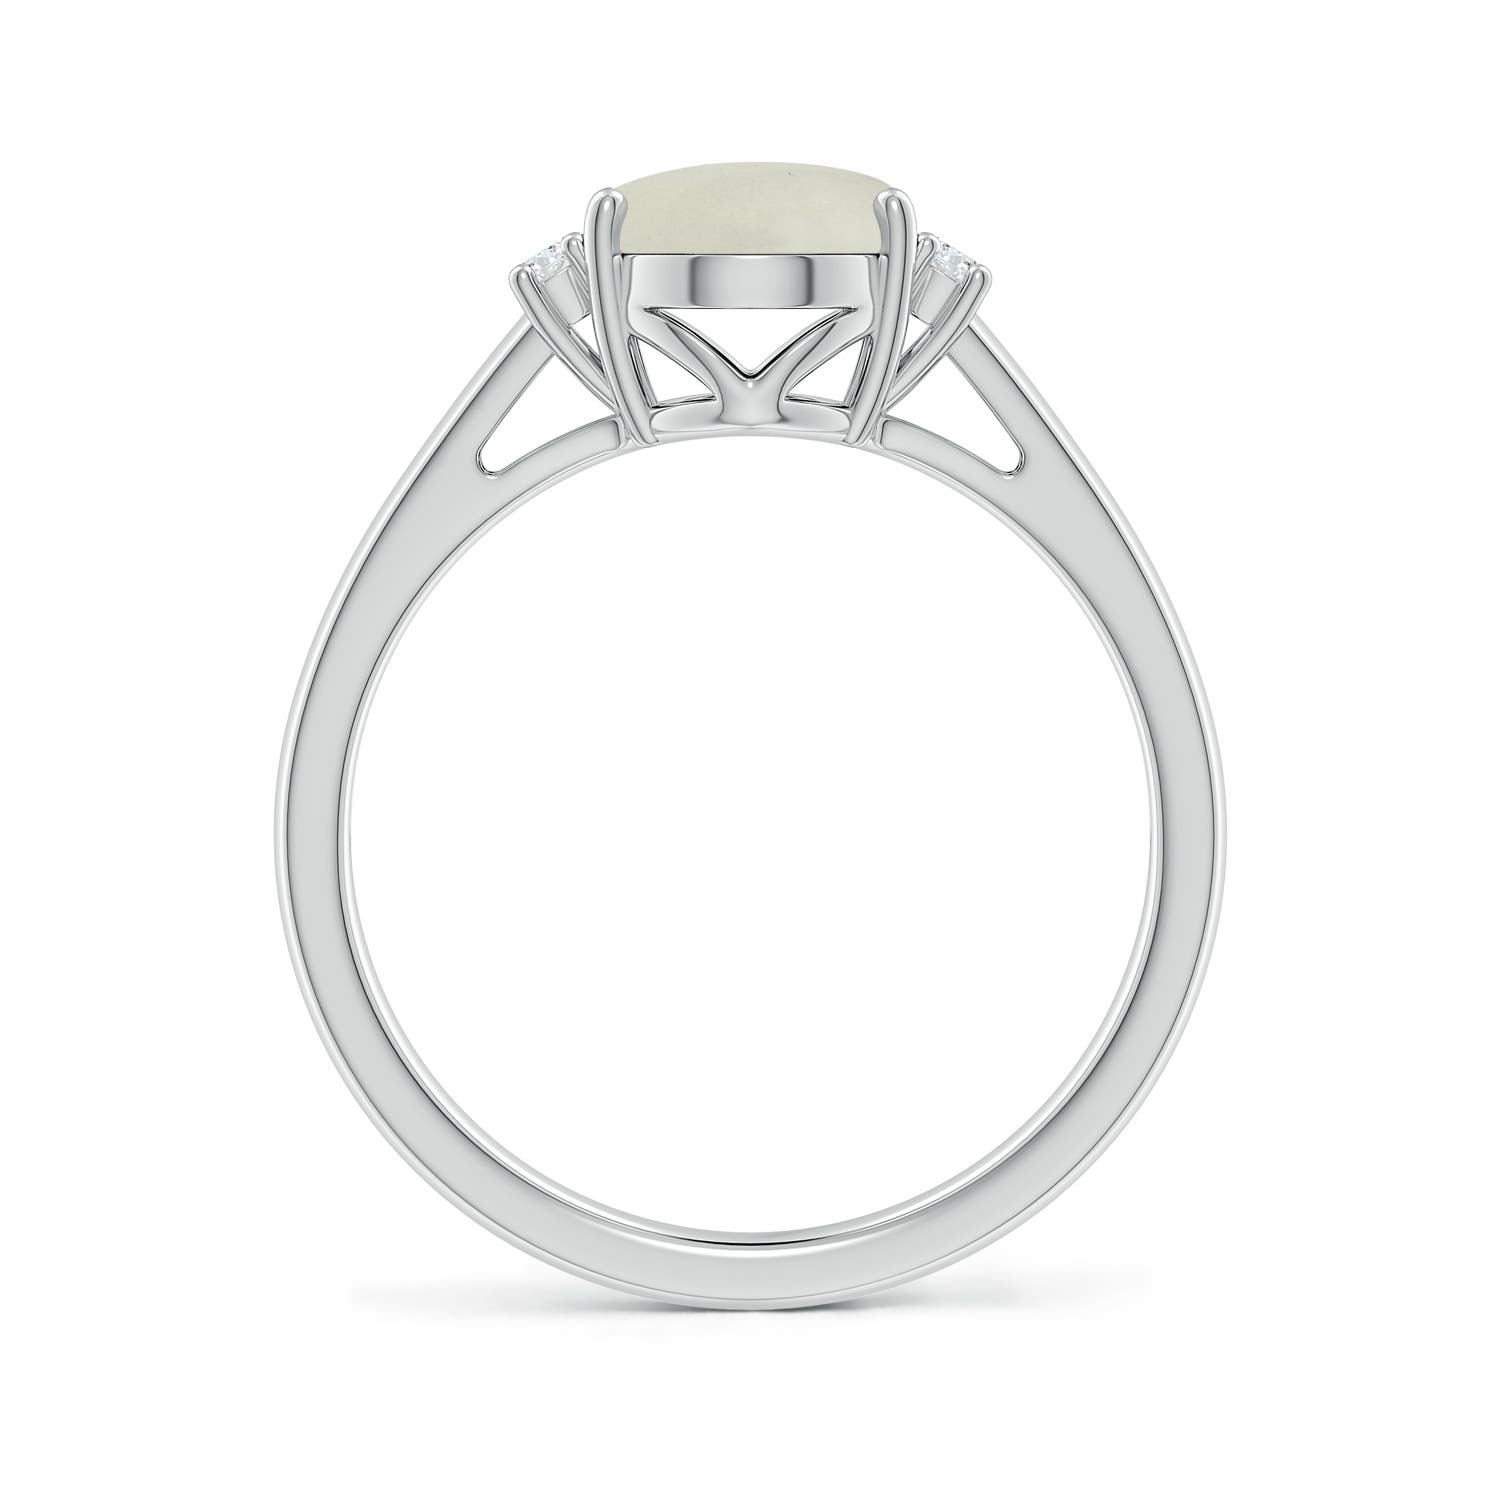 AA - Moonstone / 1.8 CT / 14 KT White Gold